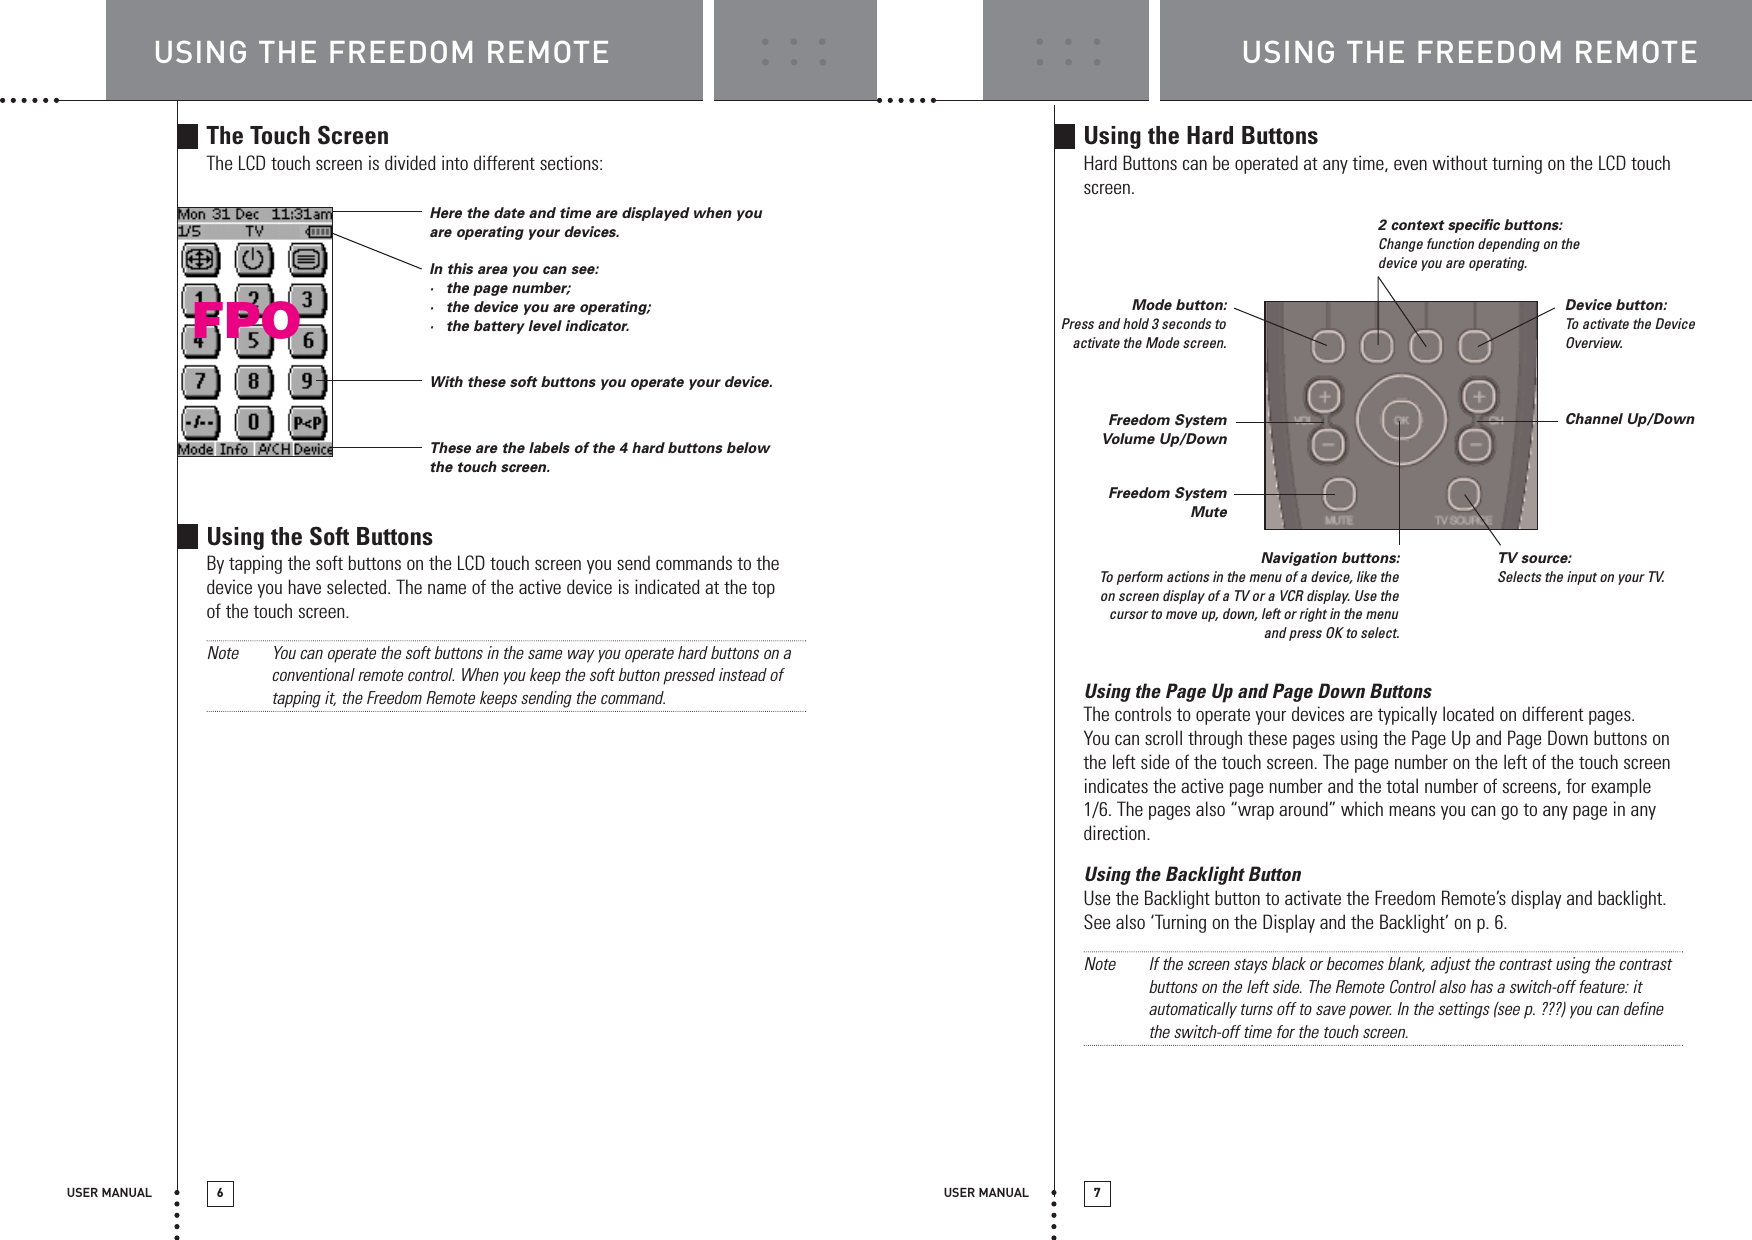 USER MANUAL 7USING THE FREEDOM REMOTEUsing the Hard ButtonsHard Buttons can be operated at any time, even without turning on the LCD touchscreen.Using the Page Up and Page Down ButtonsThe controls to operate your devices are typically located on different pages. You can scroll through these pages using the Page Up and Page Down buttons onthe left side of the touch screen. The page number on the left of the touch screenindicates the active page number and the total number of screens, for example1/6. The pages also “wrap around” which means you can go to any page in anydirection.Using the Backlight ButtonUse the Backlight button to activate the Freedom Remote’s display and backlight.See also ‘Turning on the Display and the Backlight’ on p. 6.Note If the screen stays black or becomes blank, adjust the contrast using the contrastbuttons on the left side. The Remote Control also has a switch-off feature: itautomatically turns off to save power. In the settings (see p. ???) you can definethe switch-off time for the touch screen.USING THE FREEDOM REMOTEUSER MANUAL 6The Touch ScreenThe LCD touch screen is divided into different sections:Using the Soft ButtonsBy tapping the soft buttons on the LCD touch screen you send commands to thedevice you have selected. The name of the active device is indicated at the topof the touch screen.Note You can operate the soft buttons in the same way you operate hard buttons on aconventional remote control. When you keep the soft button pressed instead oftapping it, the Freedom Remote keeps sending the command.Here the date and time are displayed when youare operating your devices.In this area you can see:·the page number;·the device you are operating;·the battery level indicator.With these soft buttons you operate your device.These are the labels of the 4 hard buttons belowthe touch screen.Device button:To  activate the DeviceOverview.Channel Up/Down2 context specific buttons:Change function depending on thedevice you are operating.Mode button:Press and hold 3 seconds toactivate the Mode screen.TV source:Selects the input on your TV.Navigation buttons:To  perform actions in the menu of a device, like theon screen display of a TV or a VCR display. Use thecursor to move up, down, left or right in the menuand press OK to select. Freedom SystemVolume Up/DownFreedom SystemMuteFPO